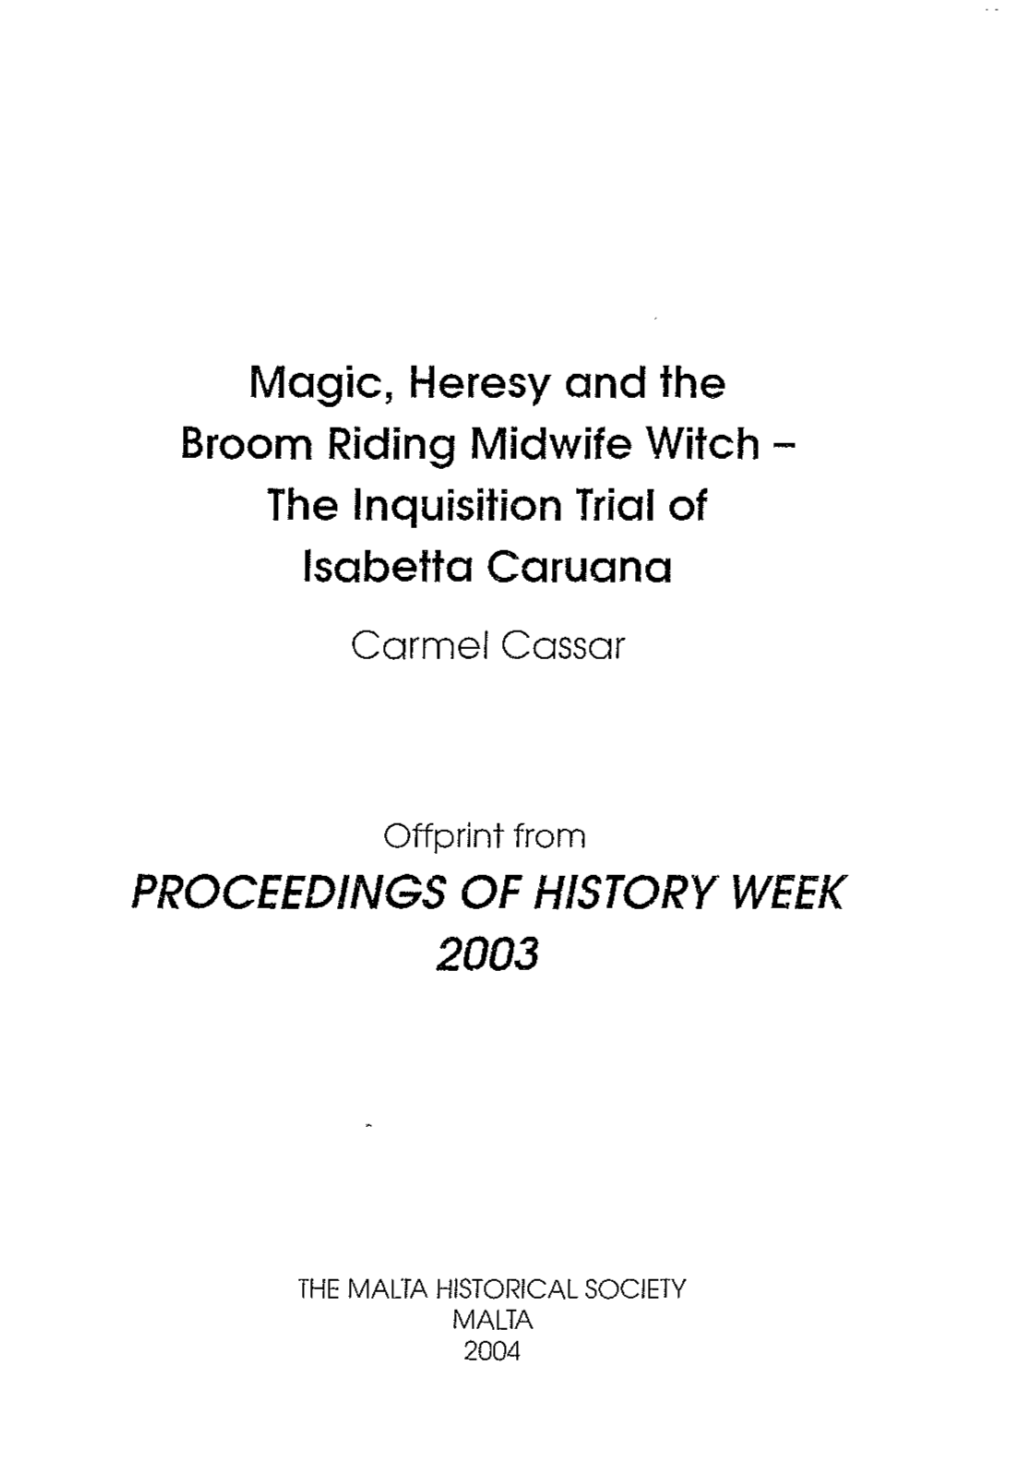 Magic, Heresy and the Broom Riding Midwife Witch - the Inquisition Trial of Isabetta Caruana